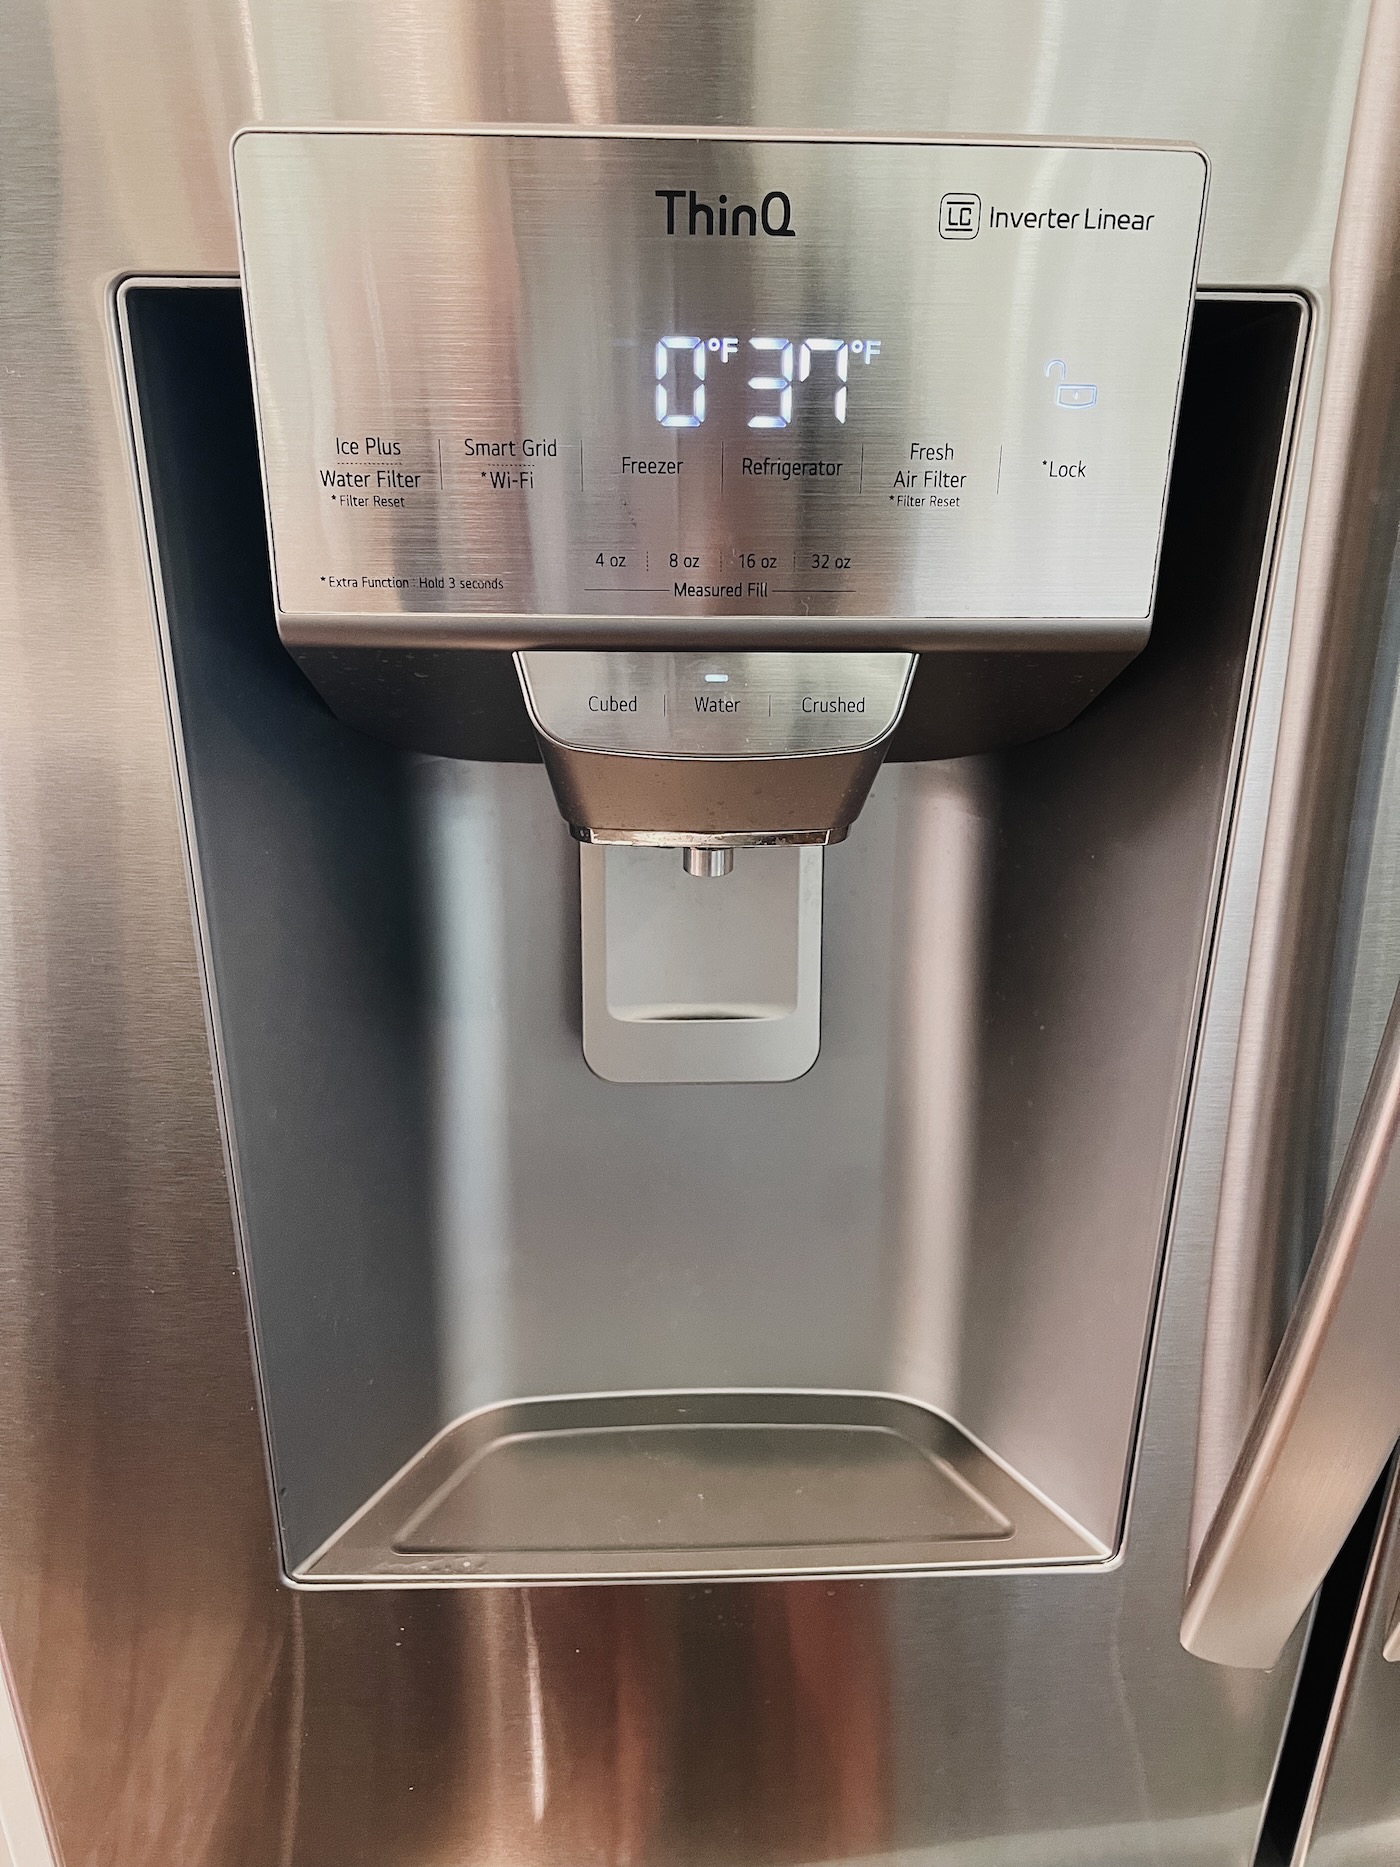 Why Is My LG Refrigerator Not Dispensing Water or Ice